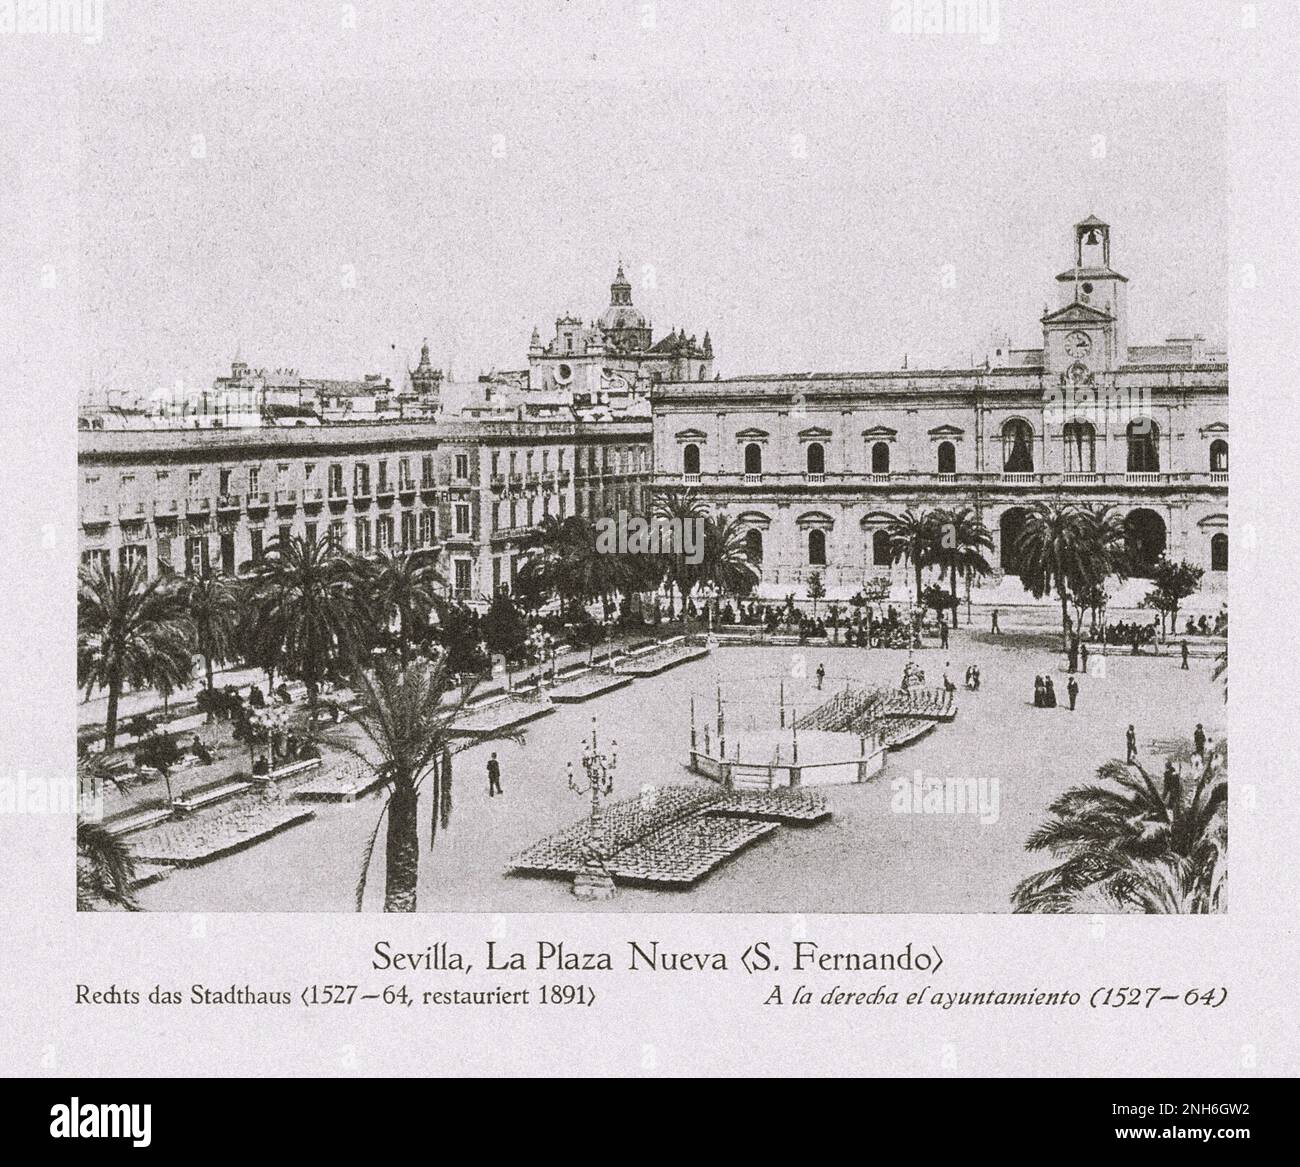 Architecture of Old Spain. La Plaza Nueva (formerly part of the San Fernando convent from 1270-1840), Seville. On the right the town house (1527-1564, restored in 1891) Stock Photo